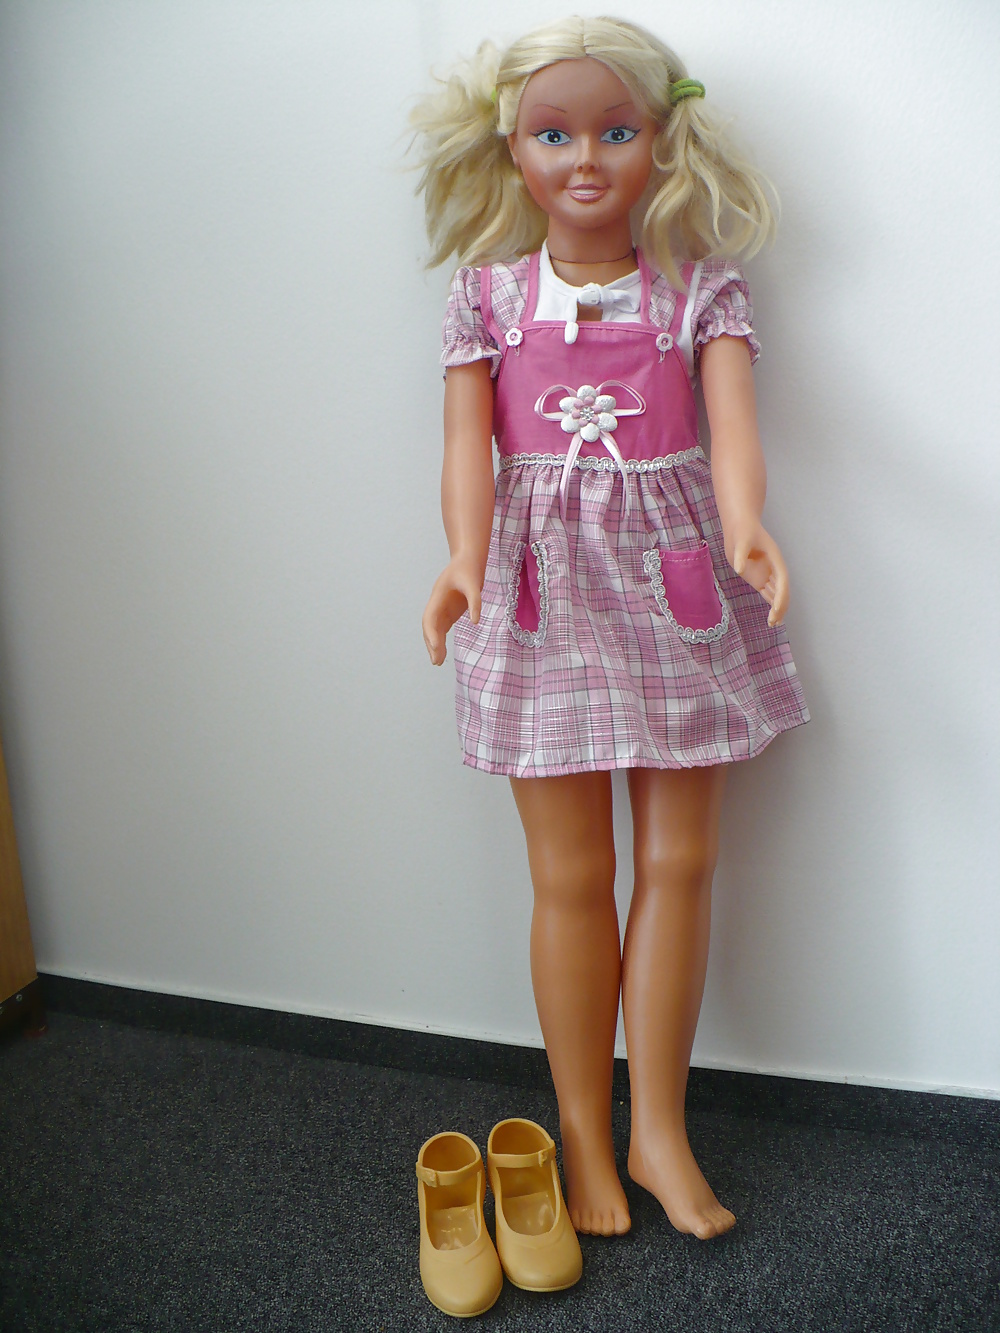 My barbie - new clothes
 #27184985